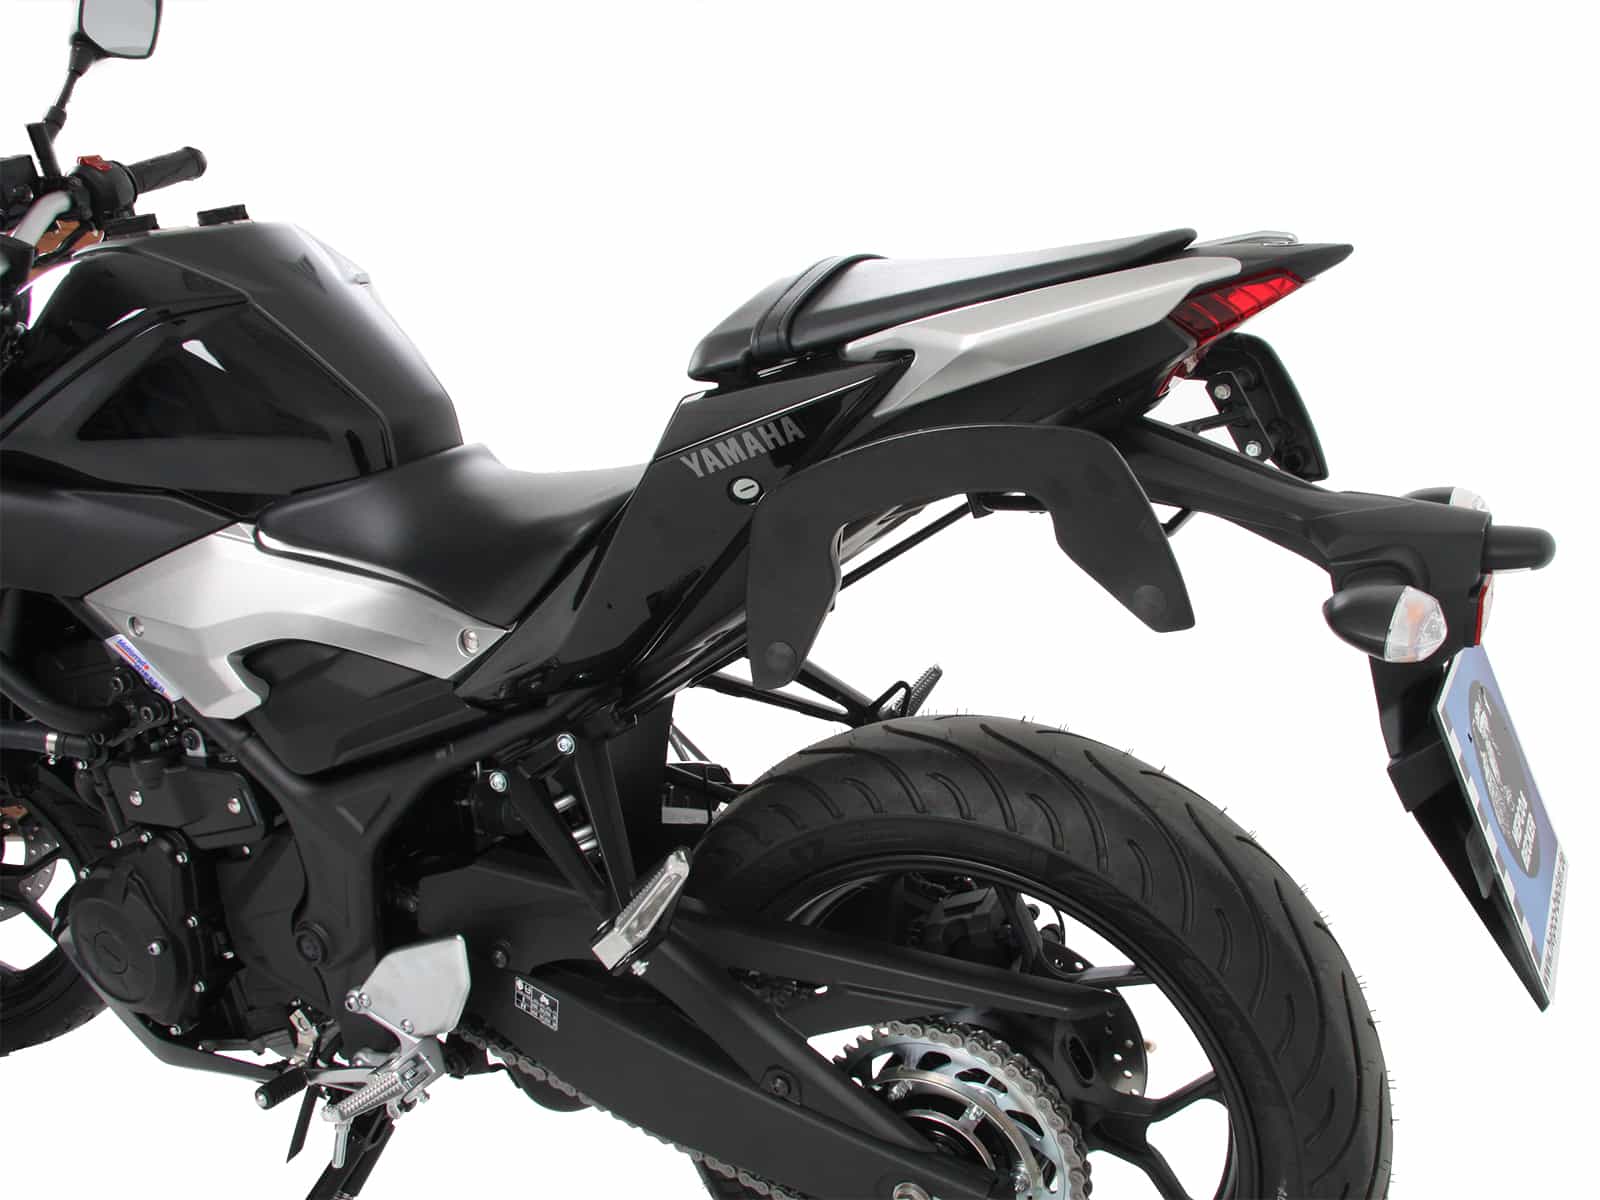 C-Bow sidecarrier for Yamaha MT-03 (2016-2019)